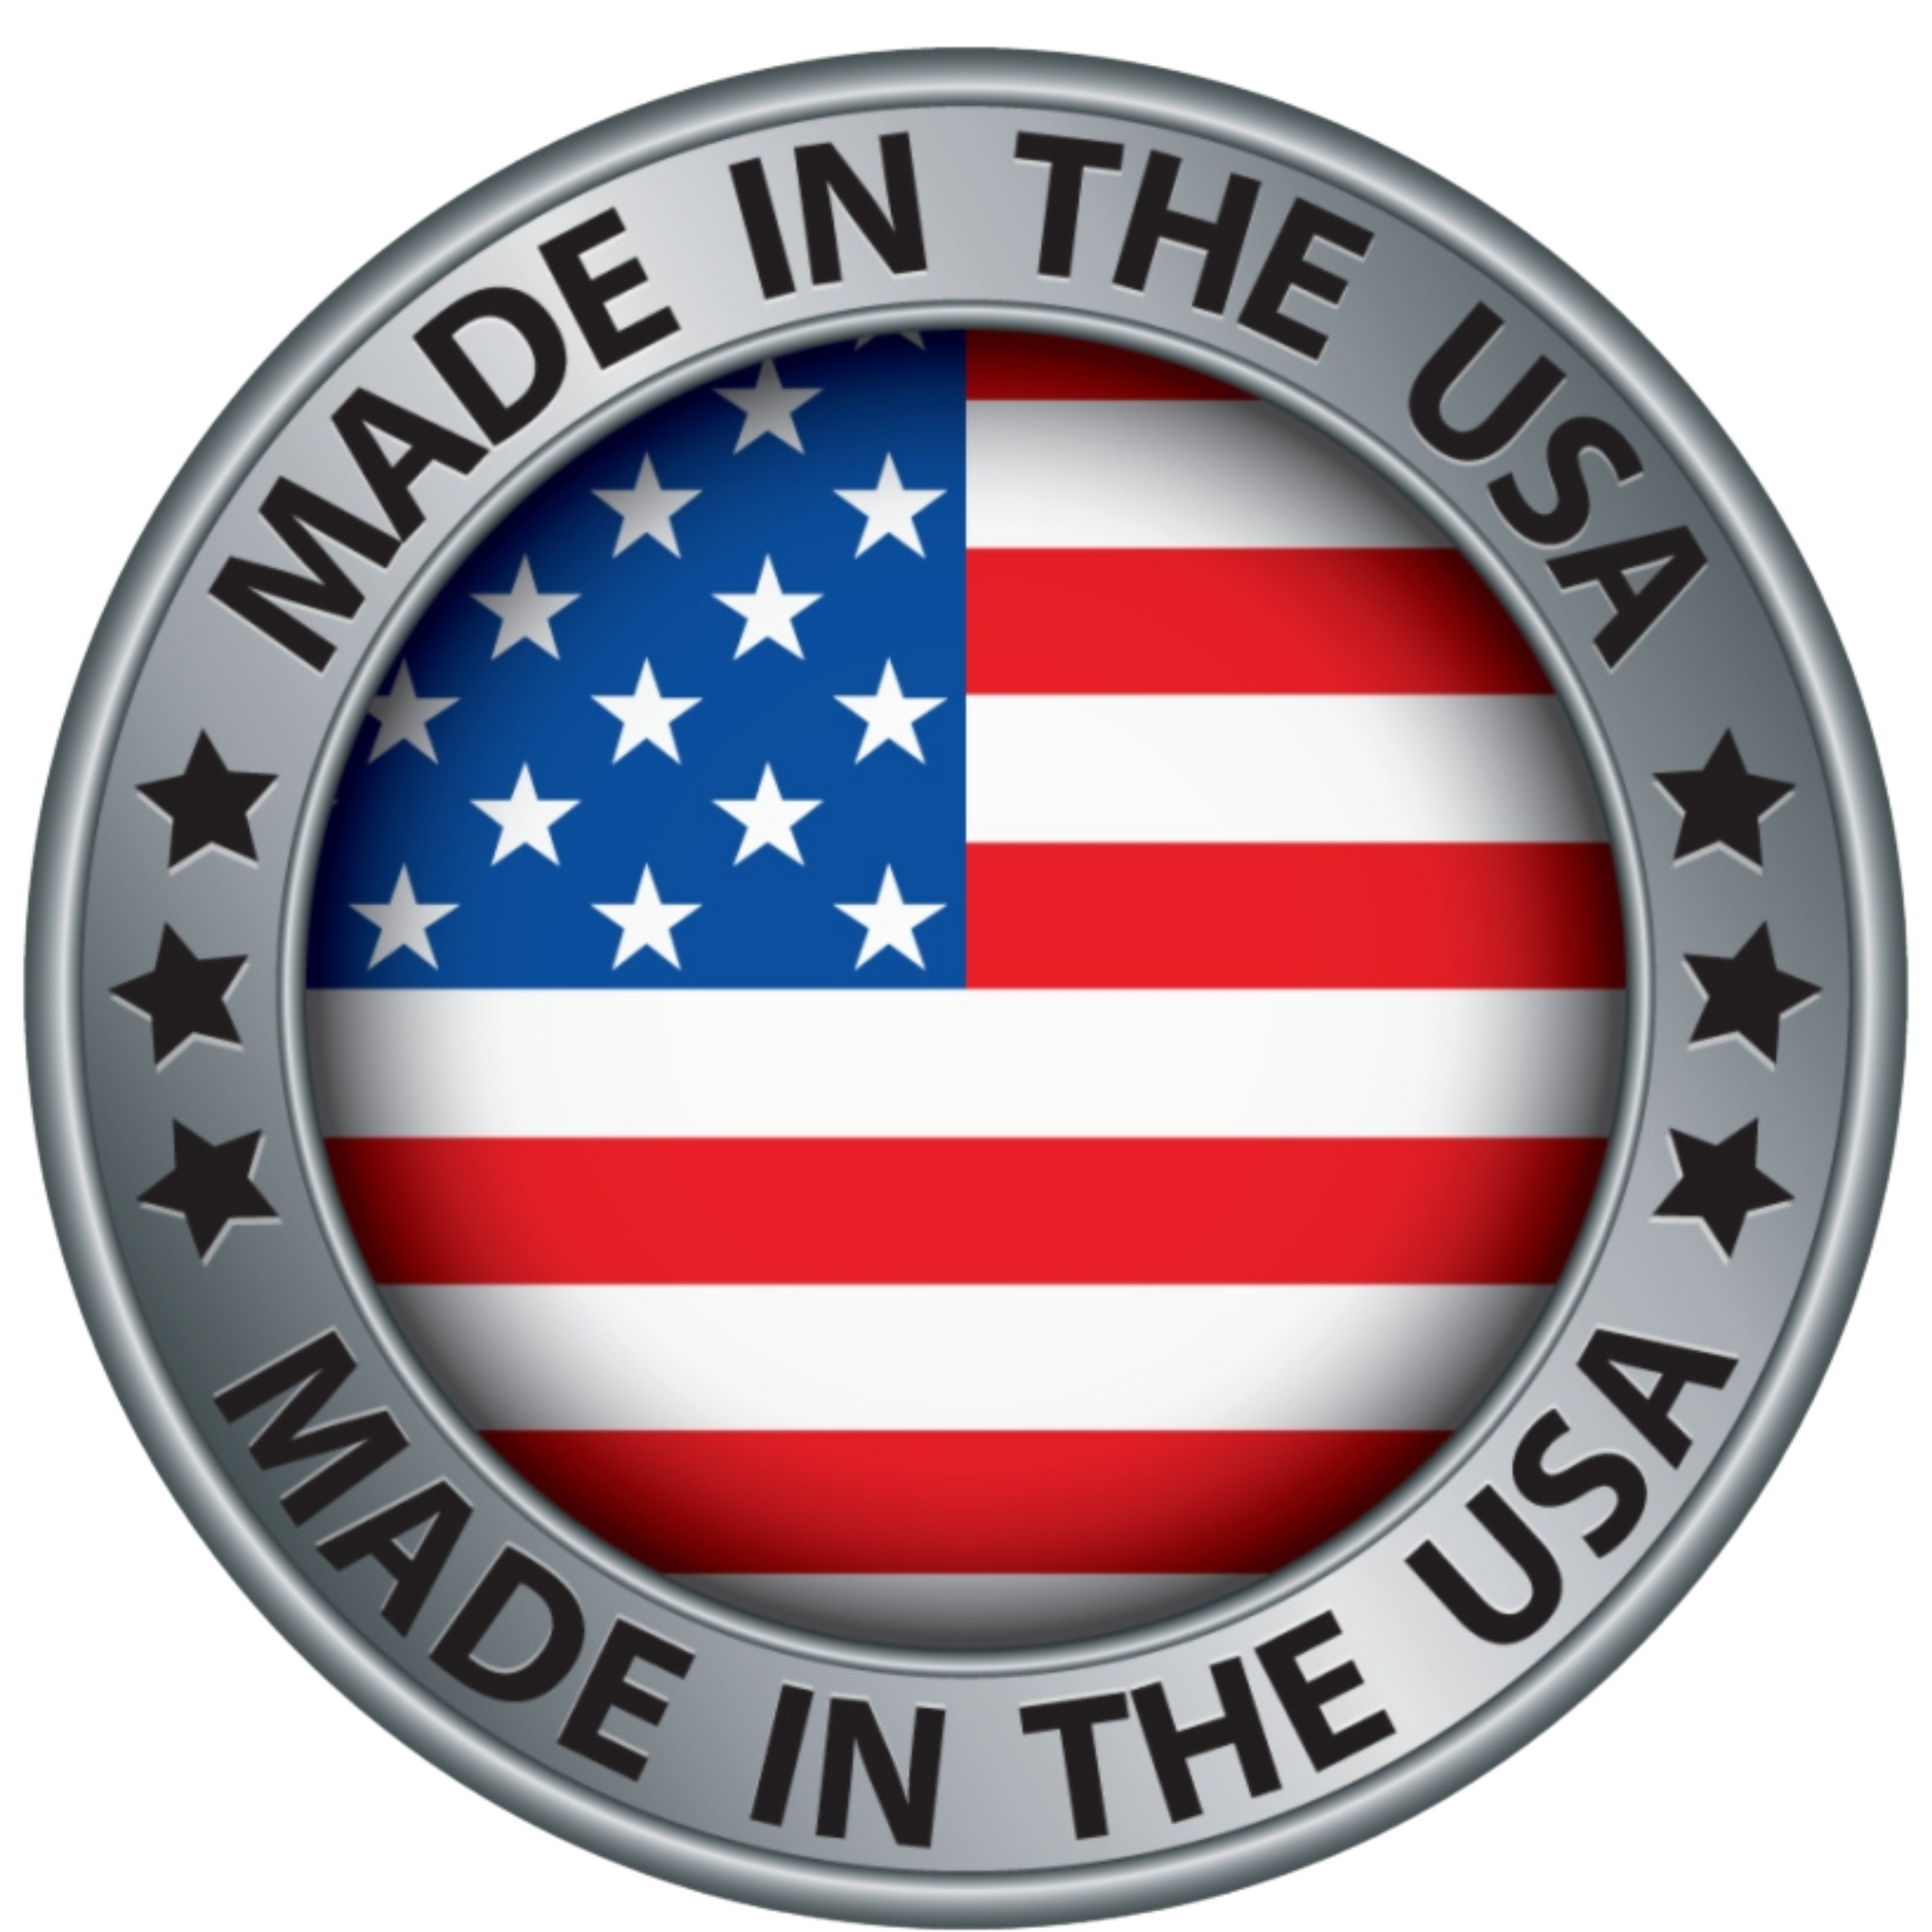 made in the USA logo, Glucose Support benefit slide, fat loss, weight loss, blood sugar, insulin resistance, carbohydrates, ketosis, ketones, antiaging, longevity, fatty liver, pcos. ozempic and metformin.